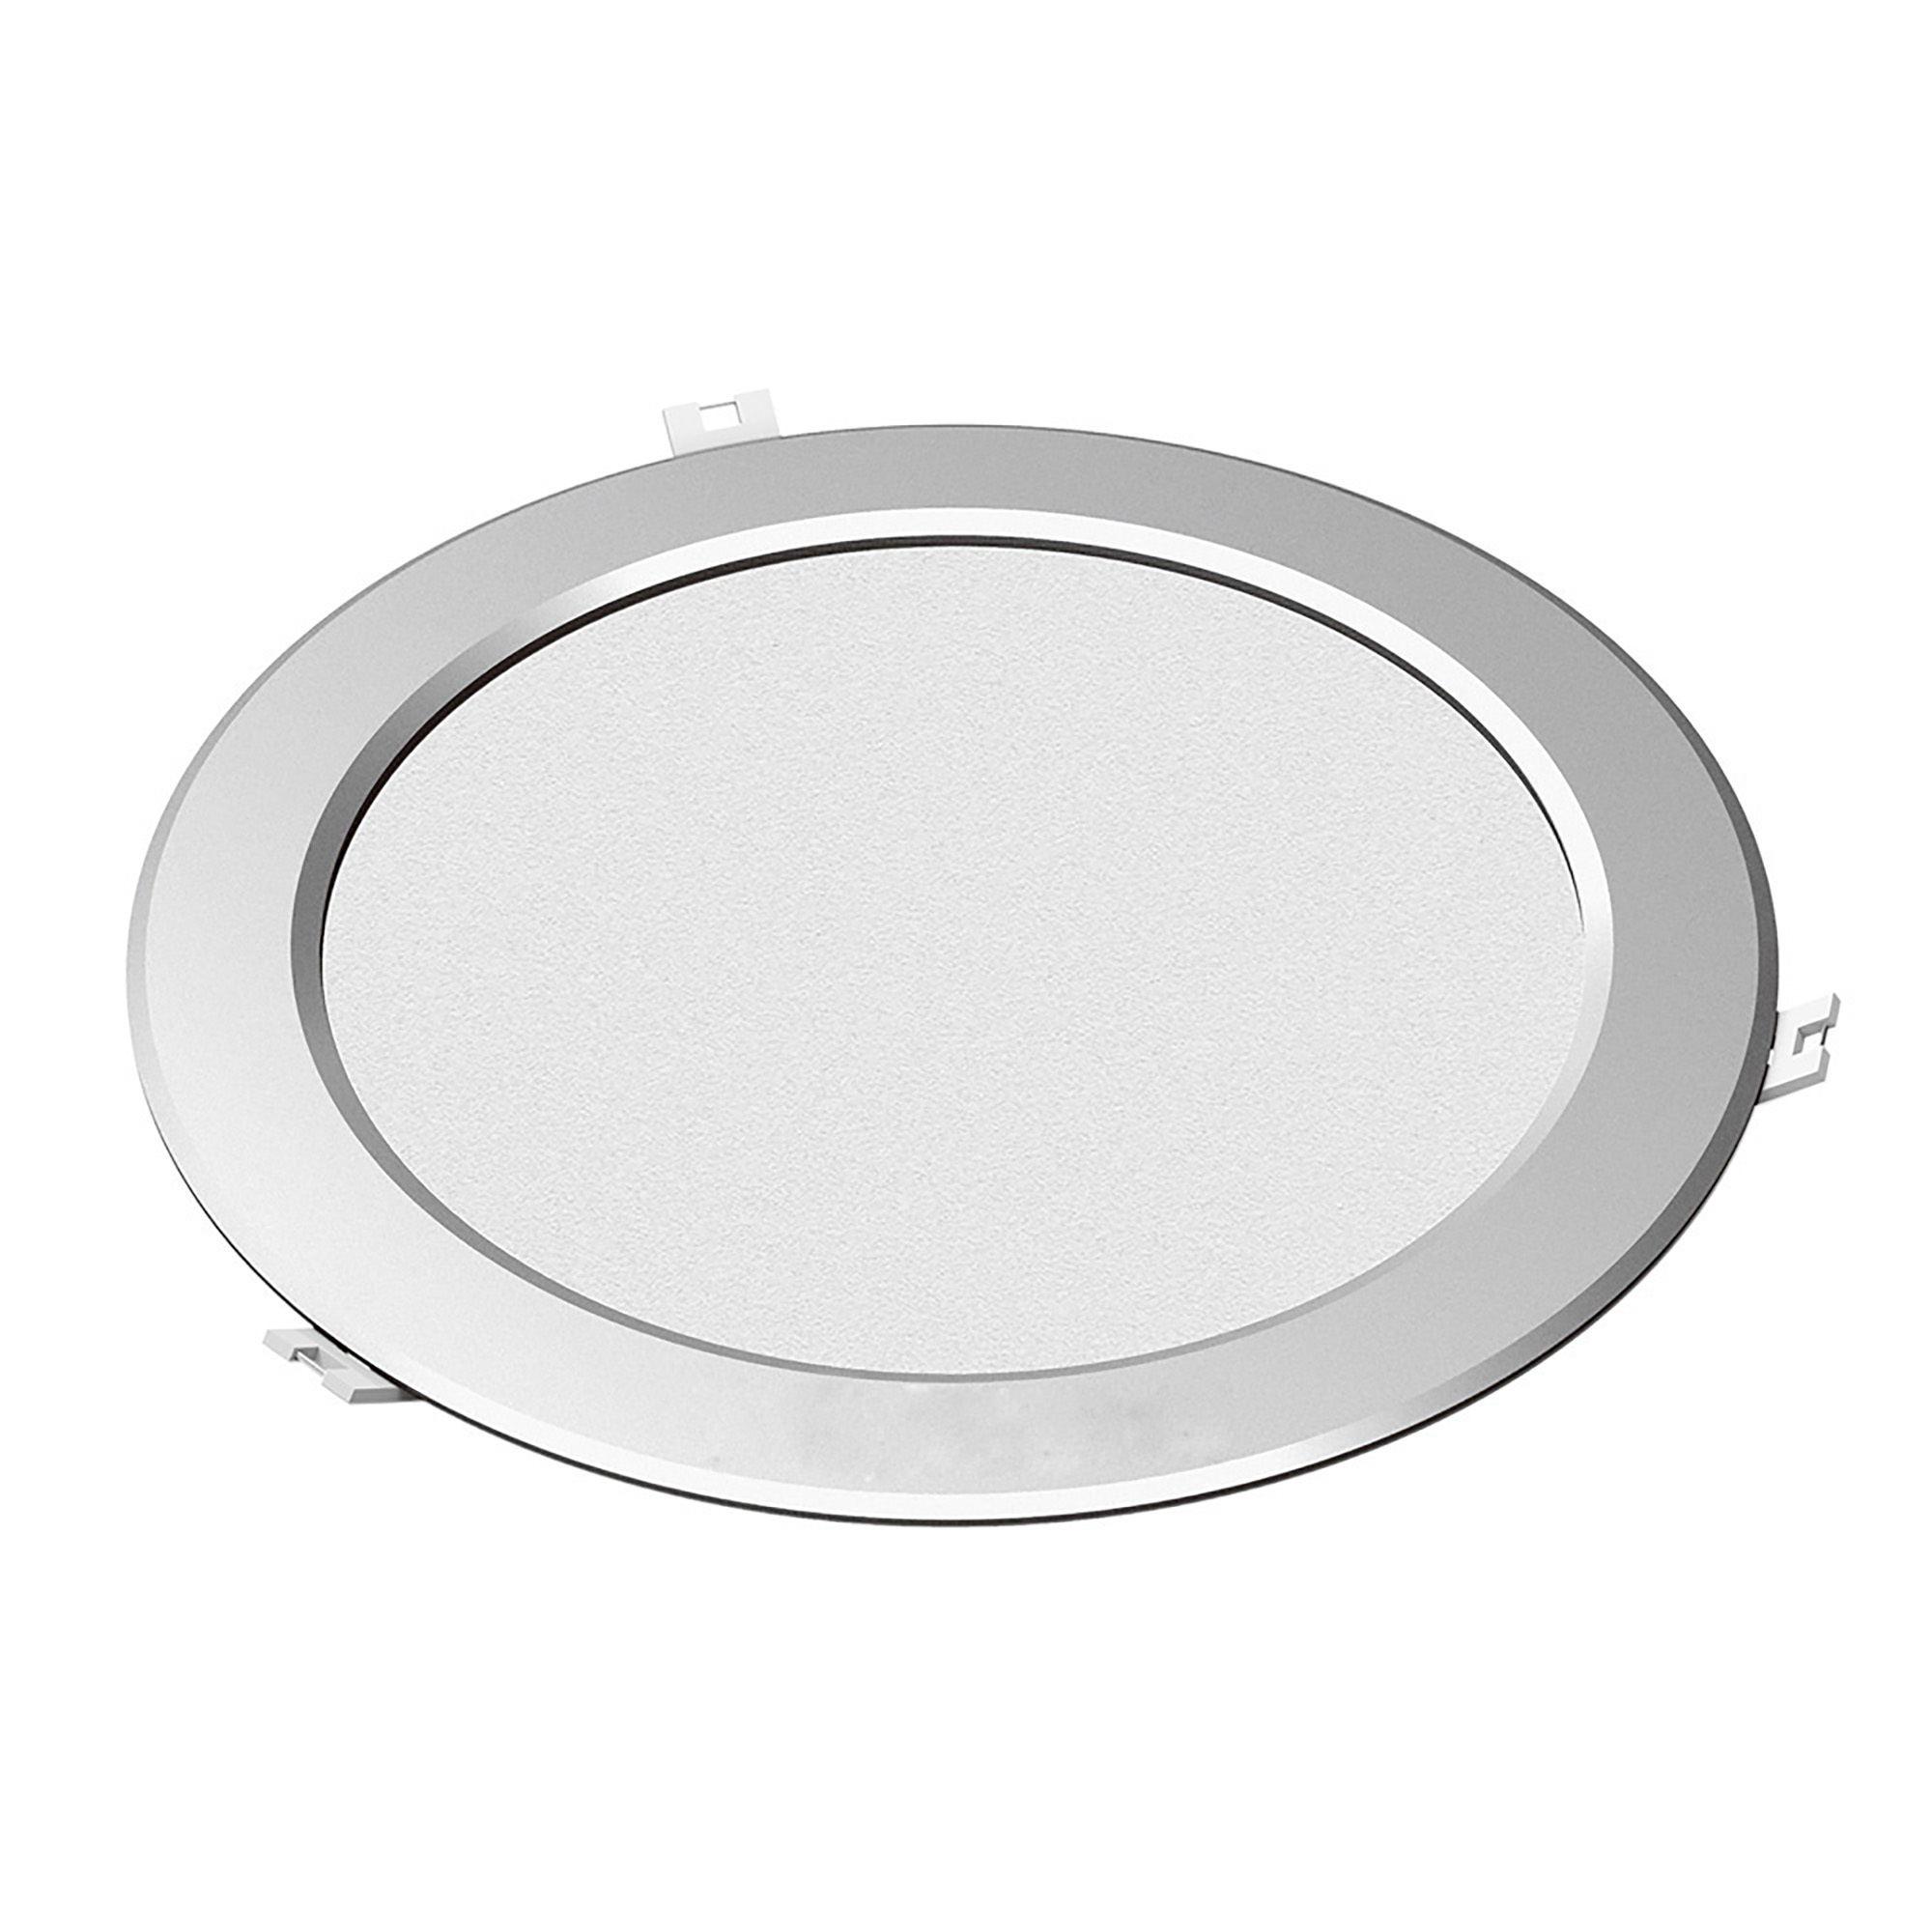 204051  Intego Round Classic 8 Inch 16W 2700K IP42 Cut-Out 210mm